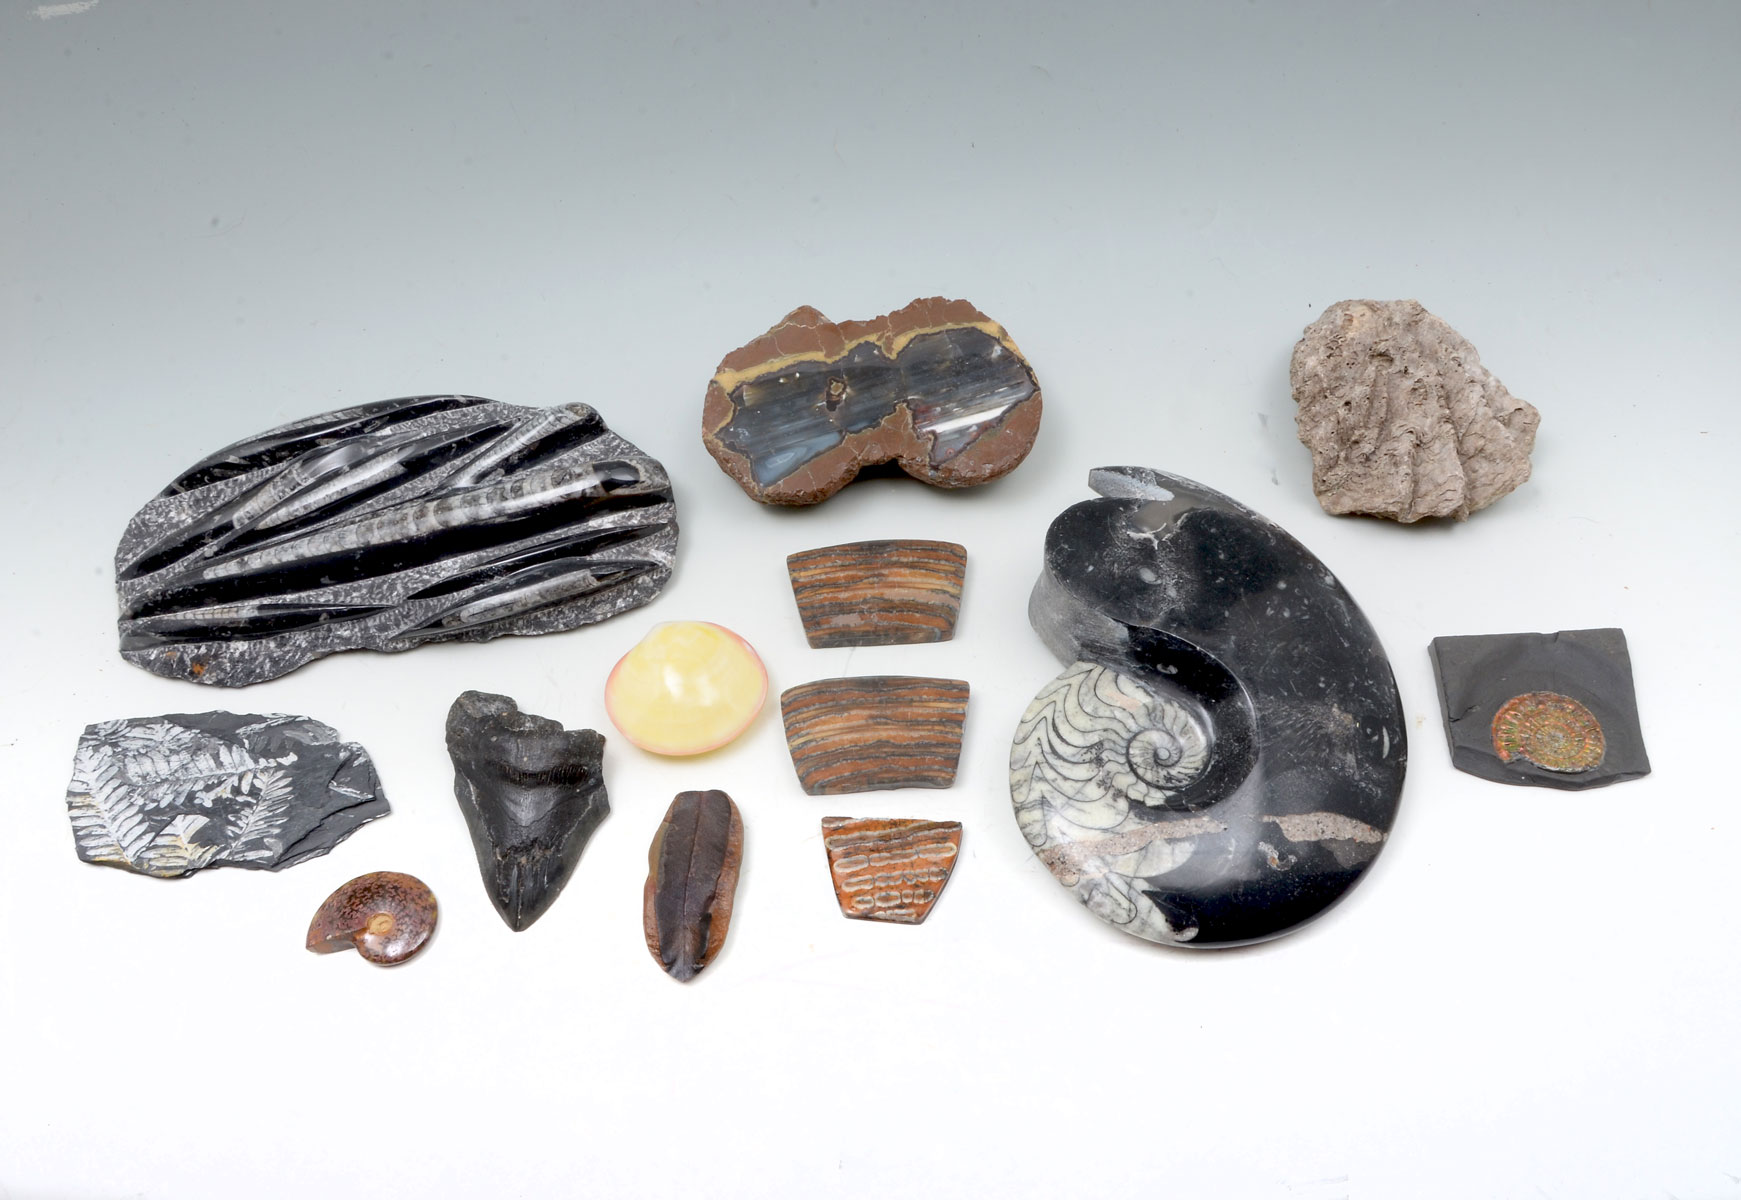 13 PIECE FOSSIL COLLECTION Comprising 36f938